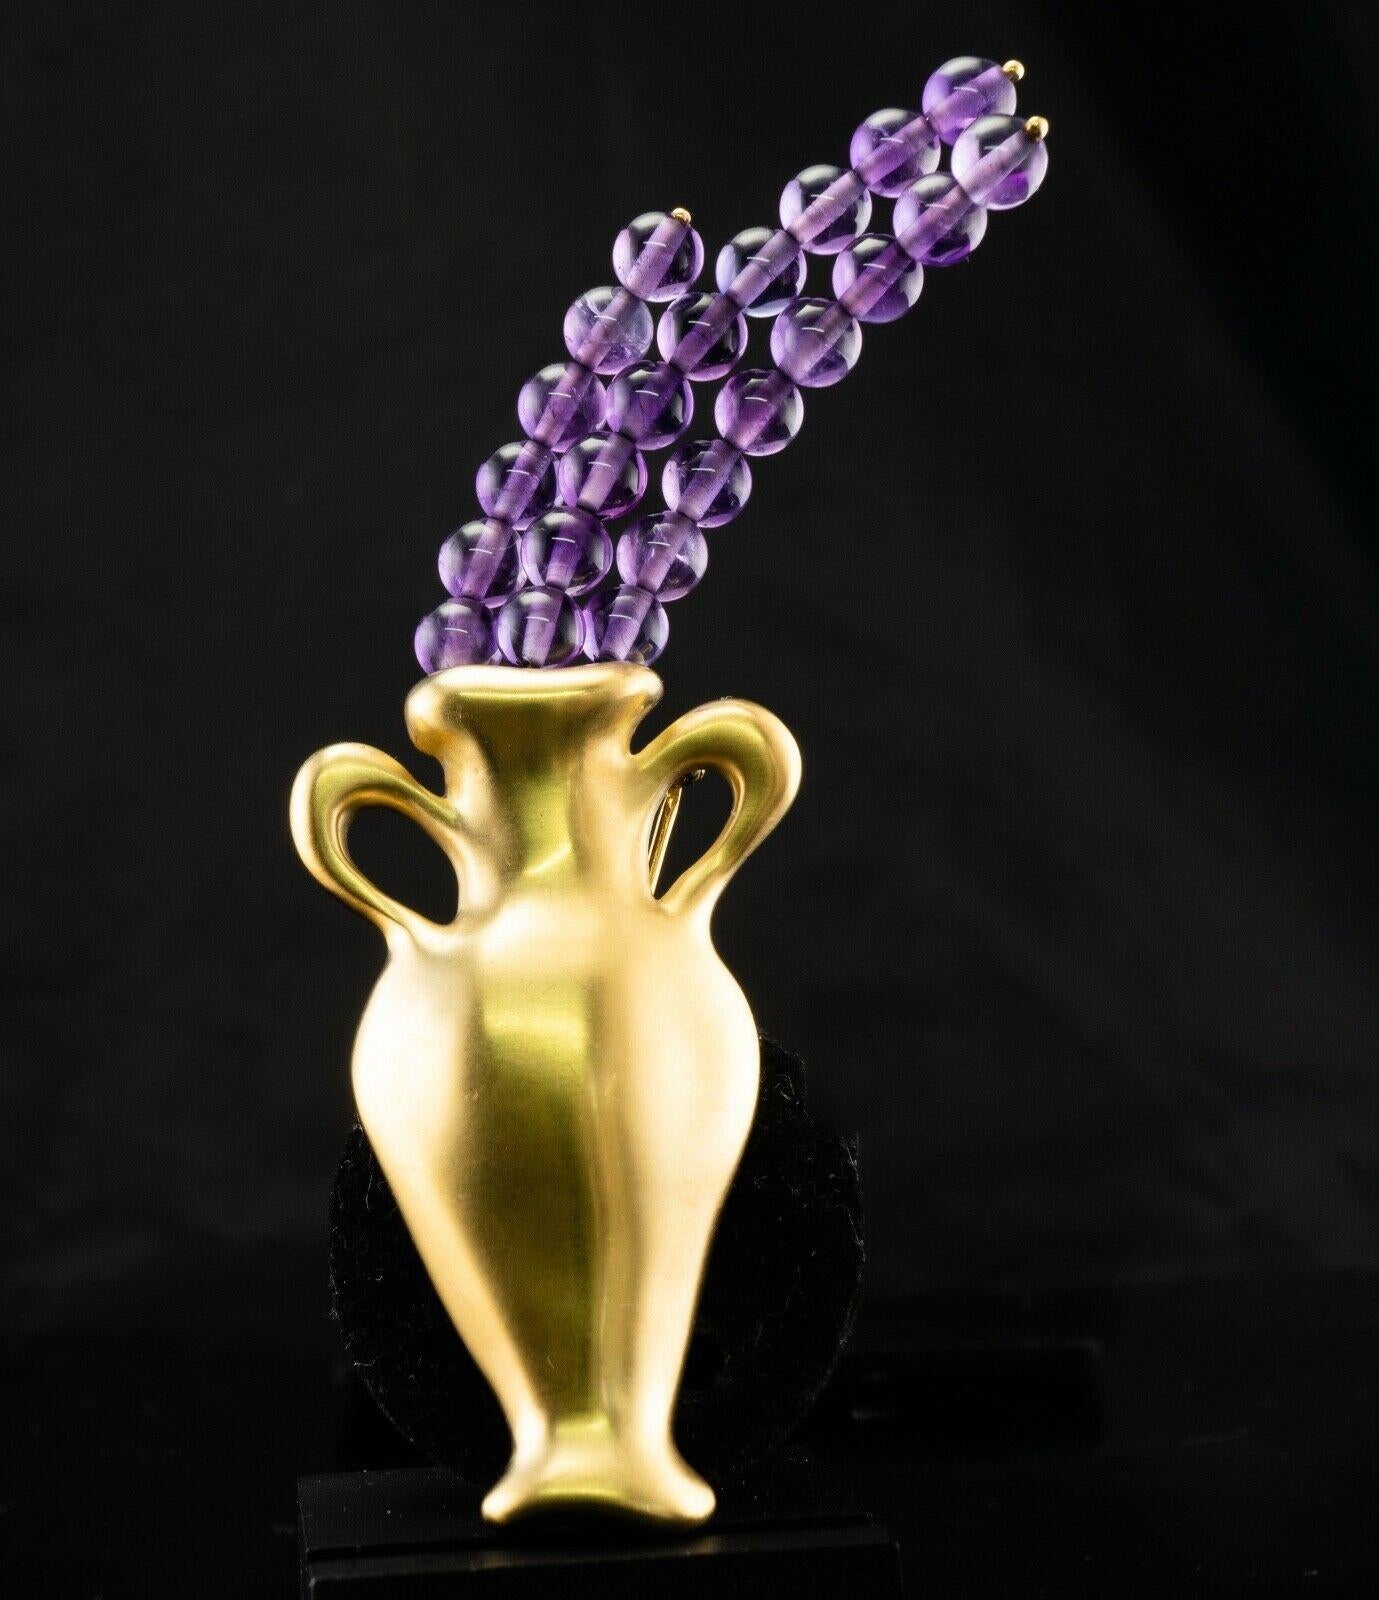 This authentic Tiffany & Co brooch is finely crafted in solid 18K Yellow Gold in the shape of a vase. Rare and unique, highly collectible. Twenty three natural Earth mined Amethyst beads measure 5mm each. These gems of a high quality are very clean